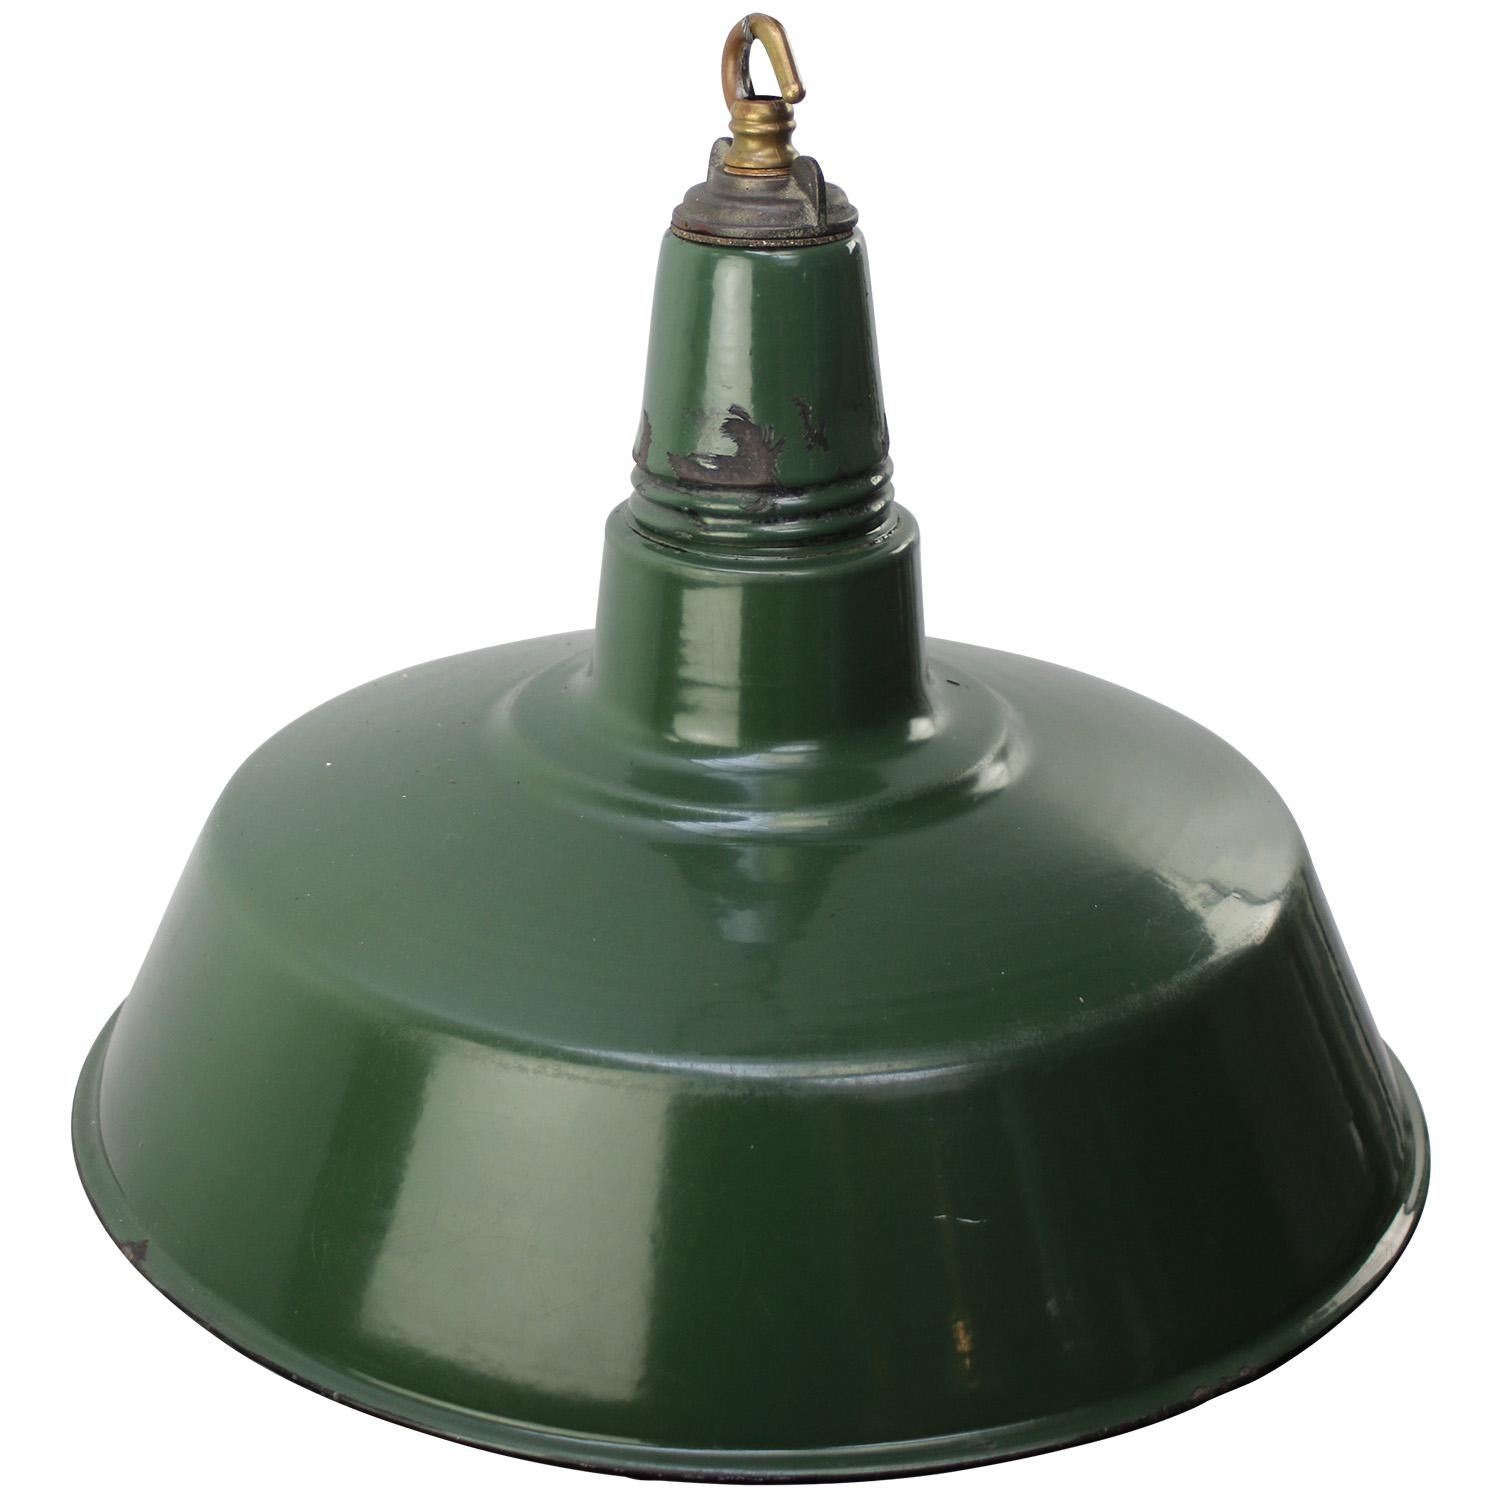 American vintage industrial hanging pendant.
Green enamel with white interior. Metal top. 

Weight: 2.50 kg / 5.5 lb

Priced per individual item. All lamps have been made suitable by international standards for incandescent light bulbs,